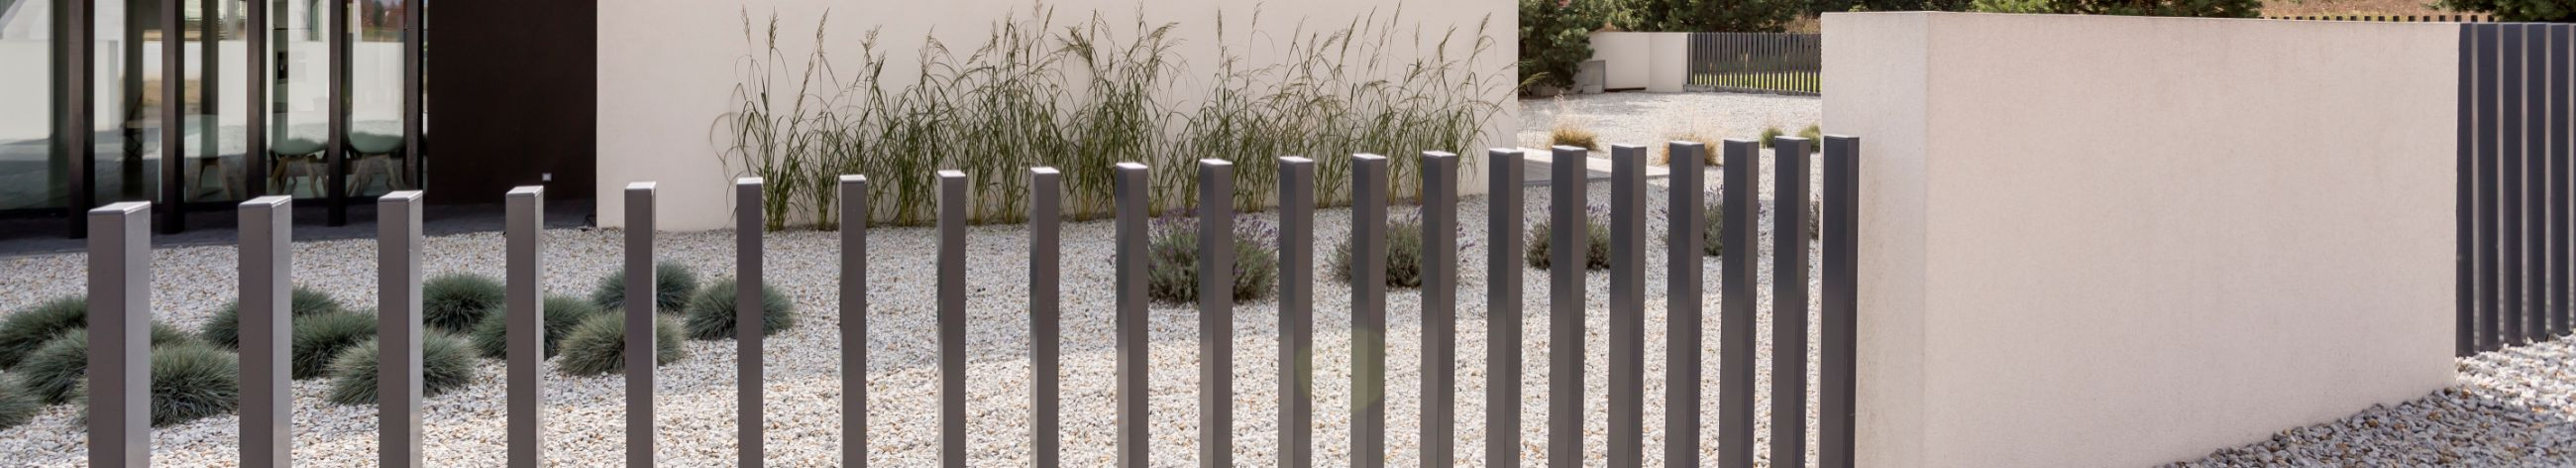 Wooden fencing gardens, Construction of roads, gardens, Gate Automation, fencing fence construction, Key-handed solutions, ADMINISTRATION AND PROTECTION, Gardens, Gates, Barrier trees, wing and sliding gates, Garden posts